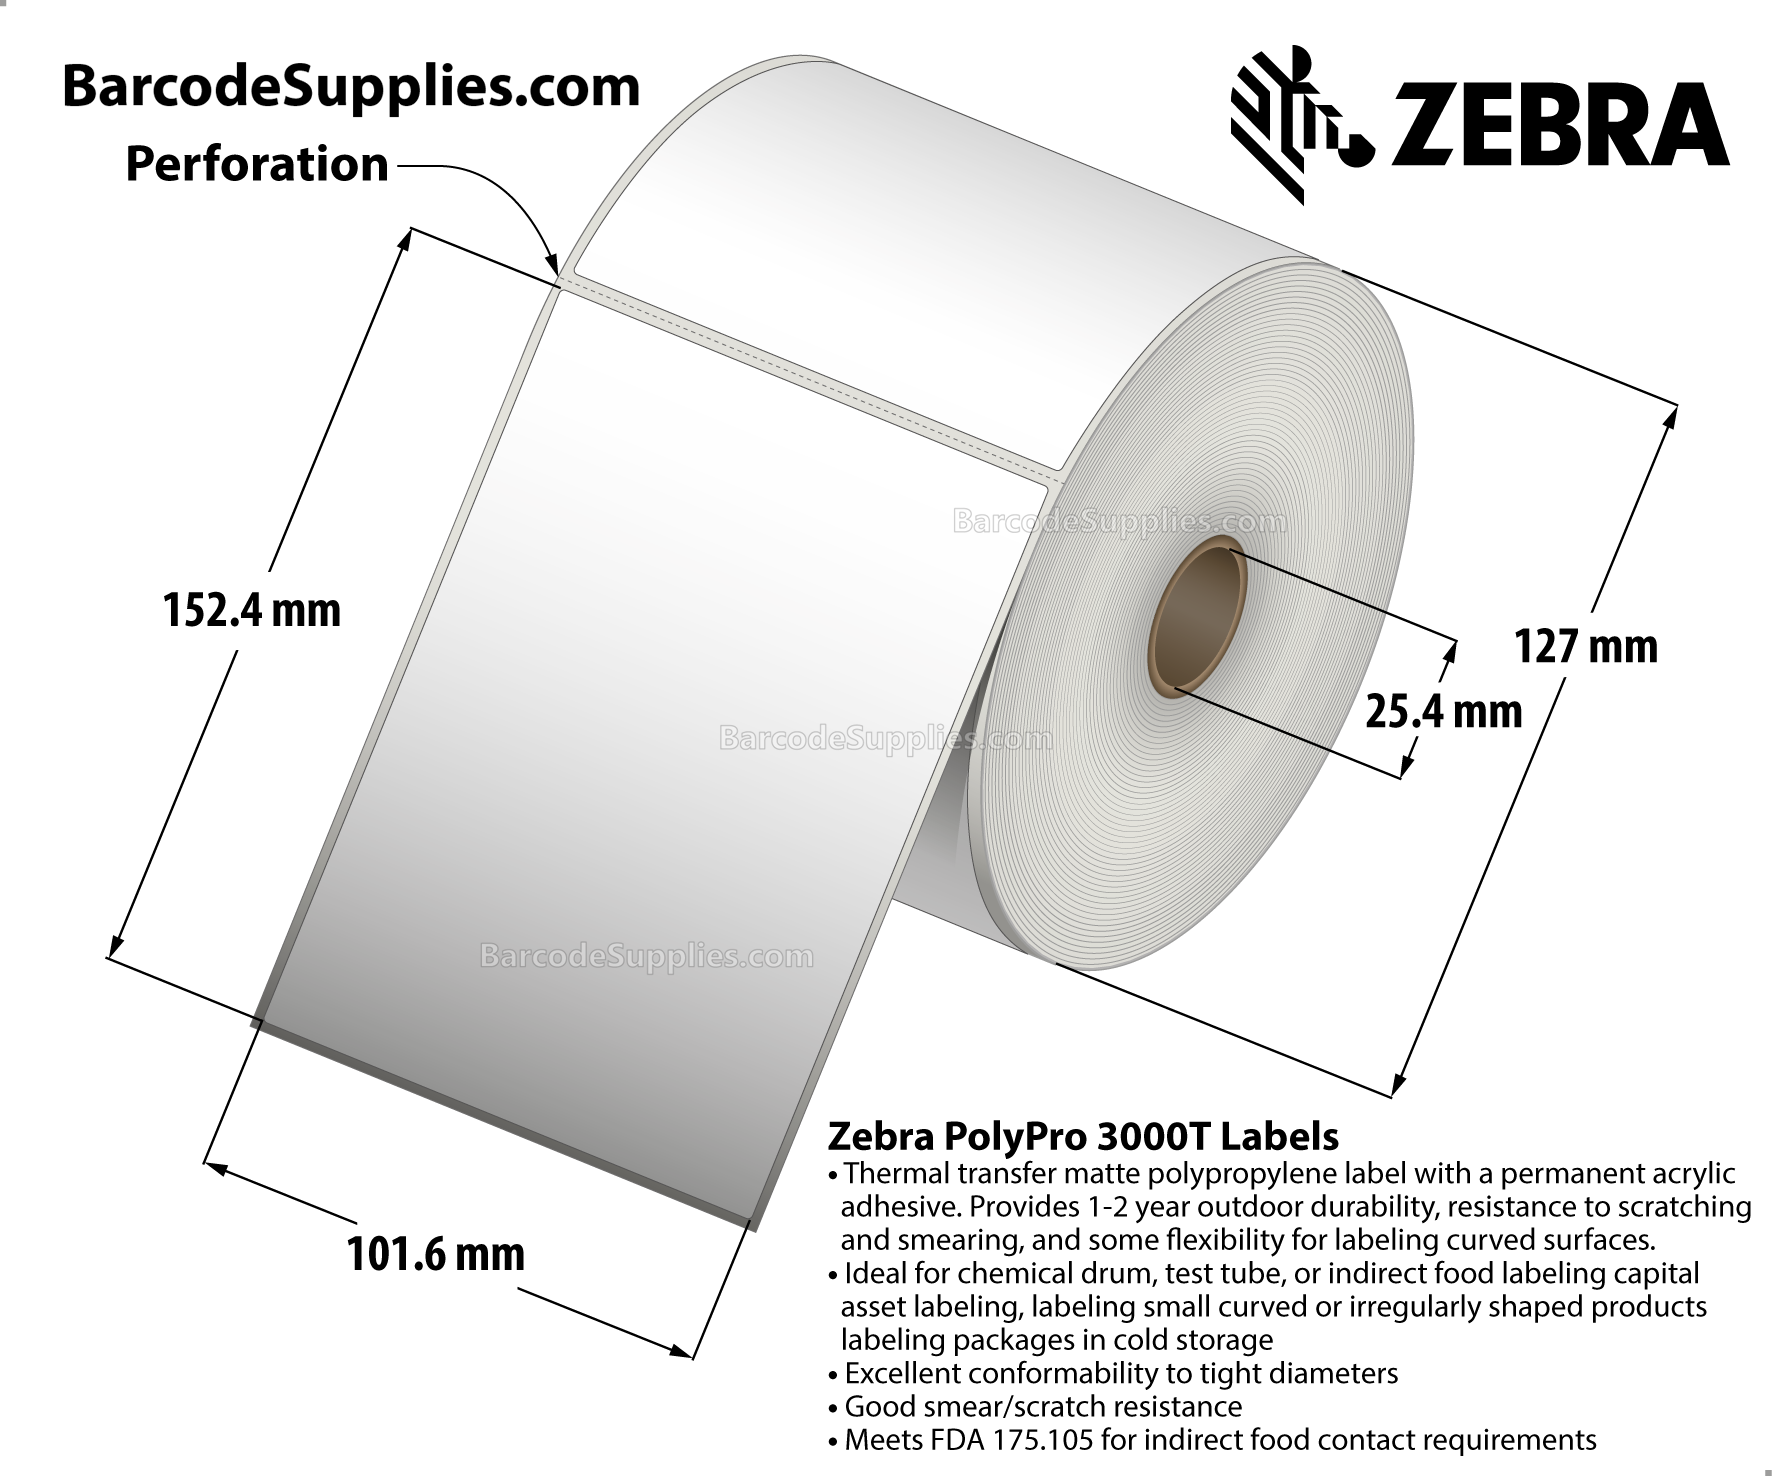 4 x 6 Thermal Transfer White PolyPro 3000T Labels With Permanent Adhesive - Perforated - 390 Labels Per Roll - Carton Of 4 Rolls - 1560 Labels Total - MPN: 18926